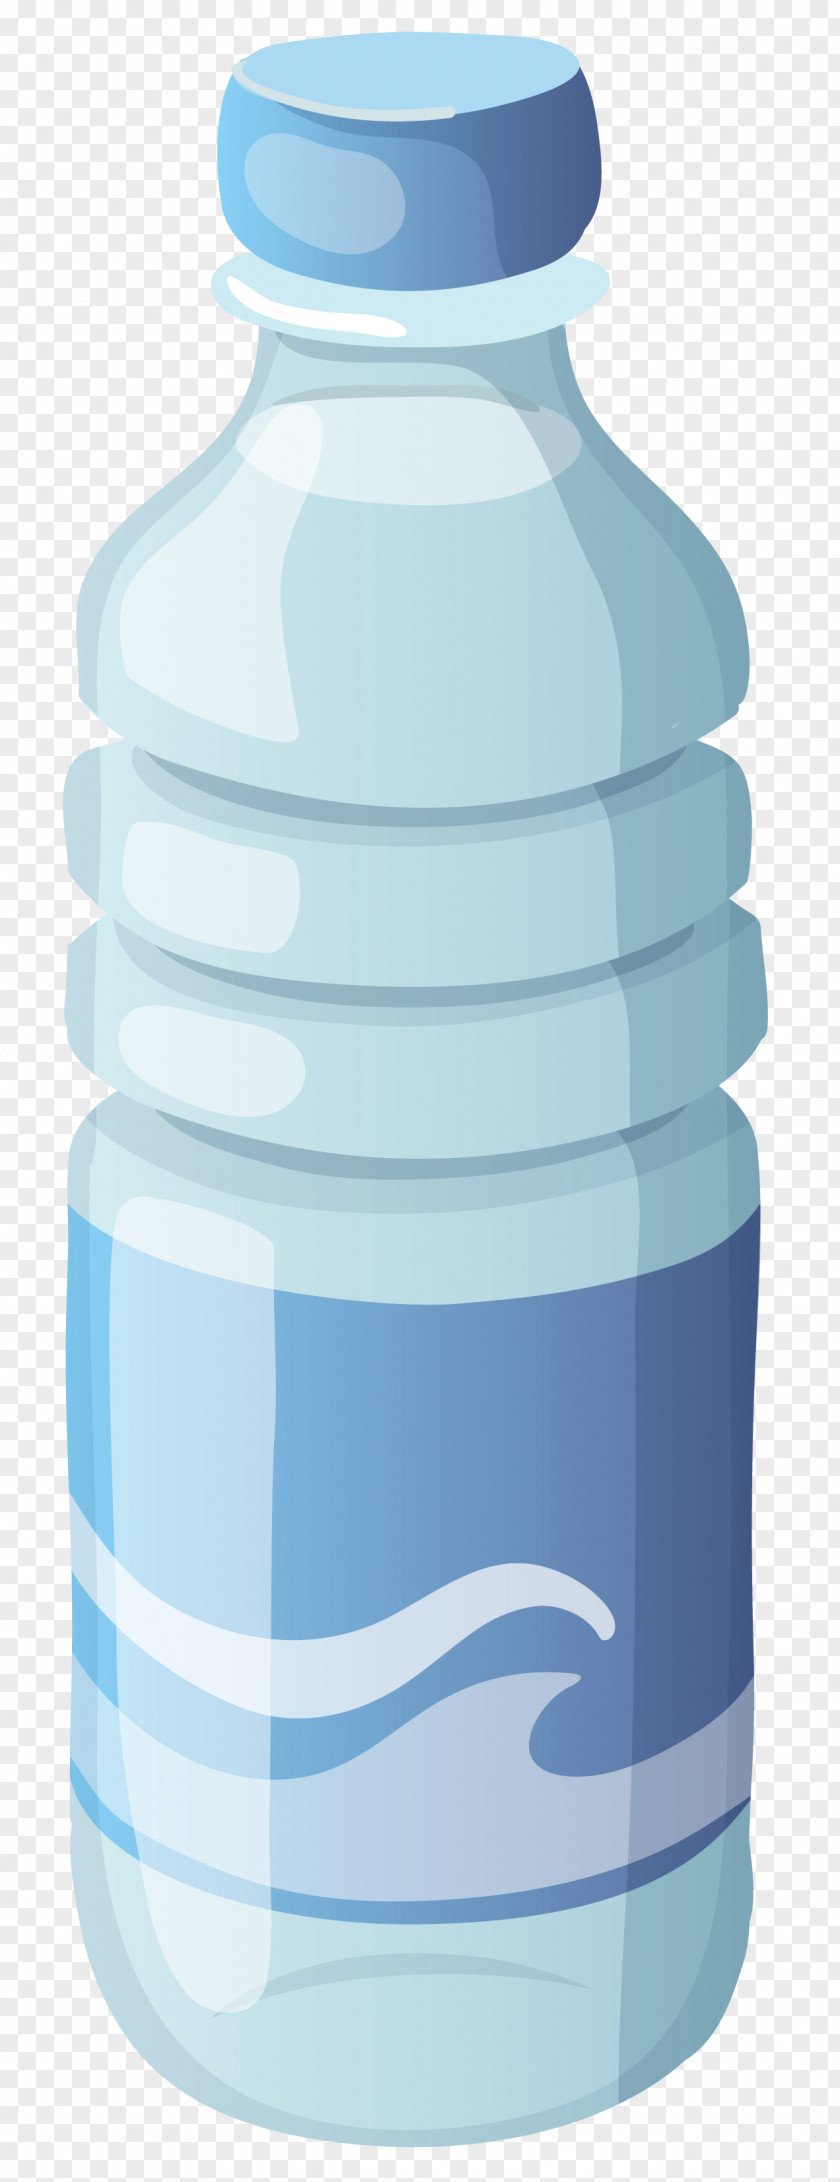 Small Mineral Water Bottle Clipart Image Bottled Clip Art PNG